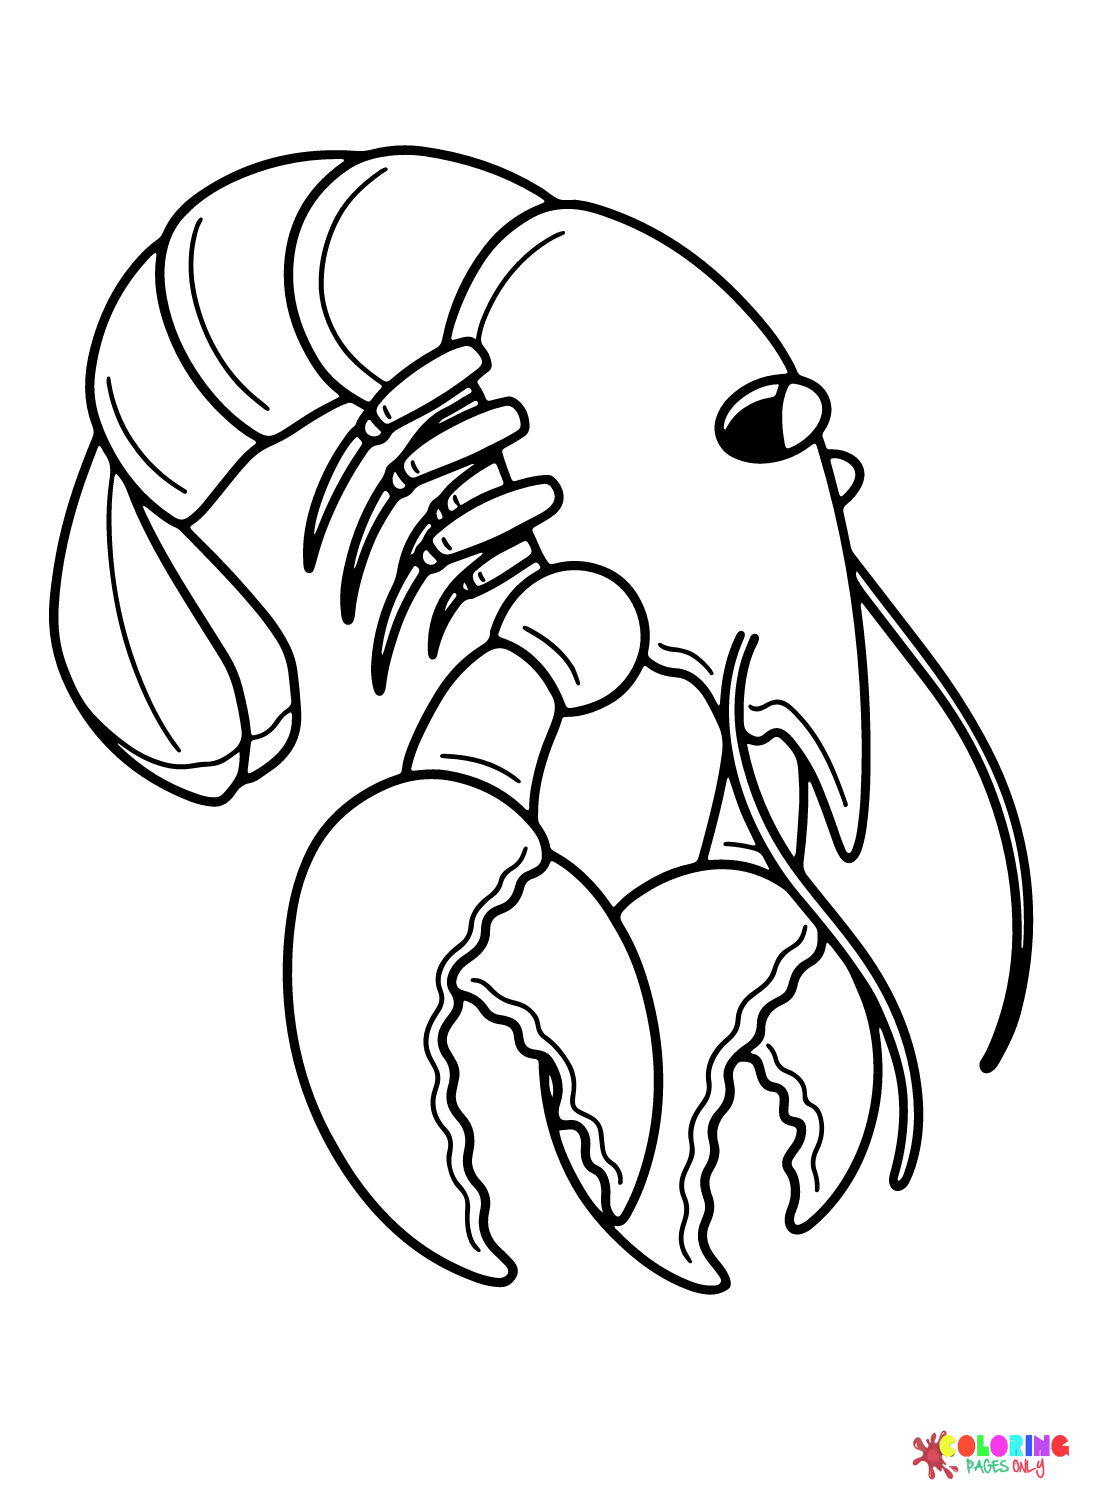 Lobster for Kids Coloring Page